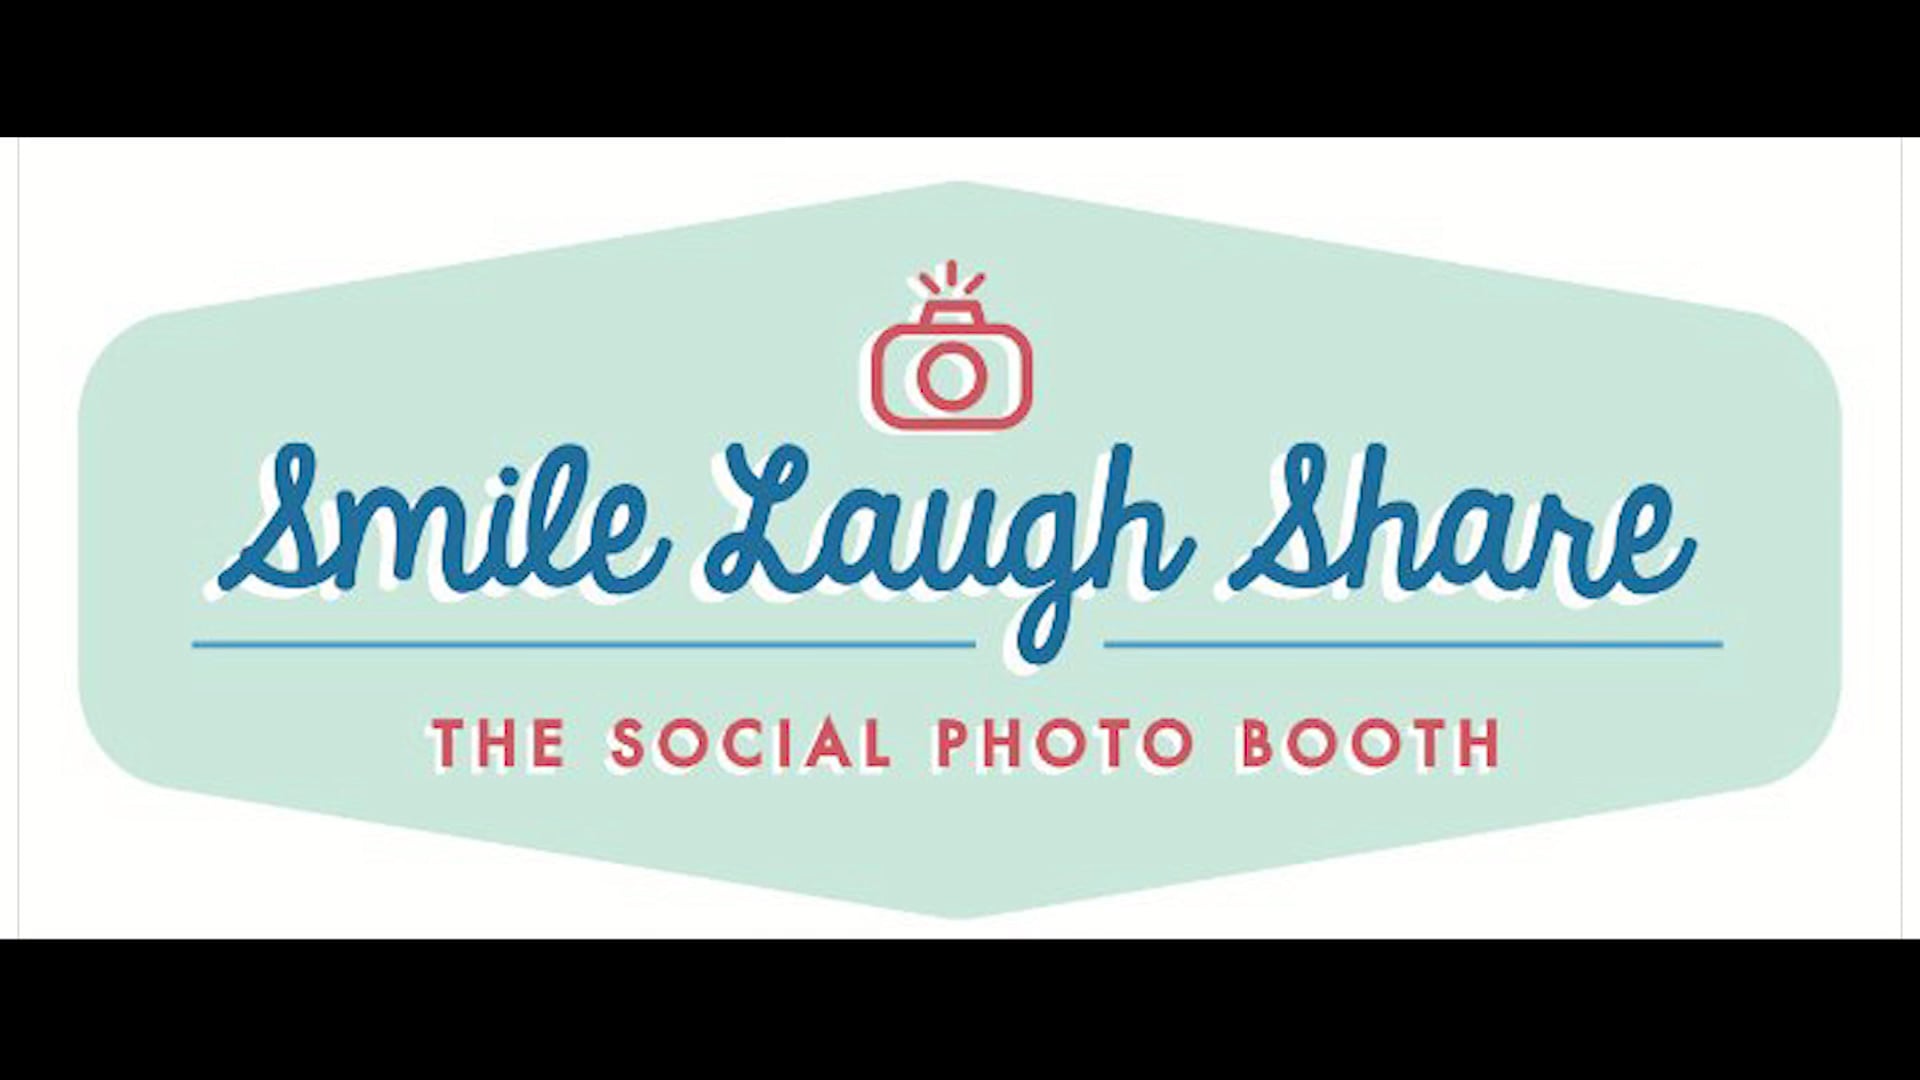 Promotional video thumbnail 1 for Smile Laugh Share The Social Photo Booth